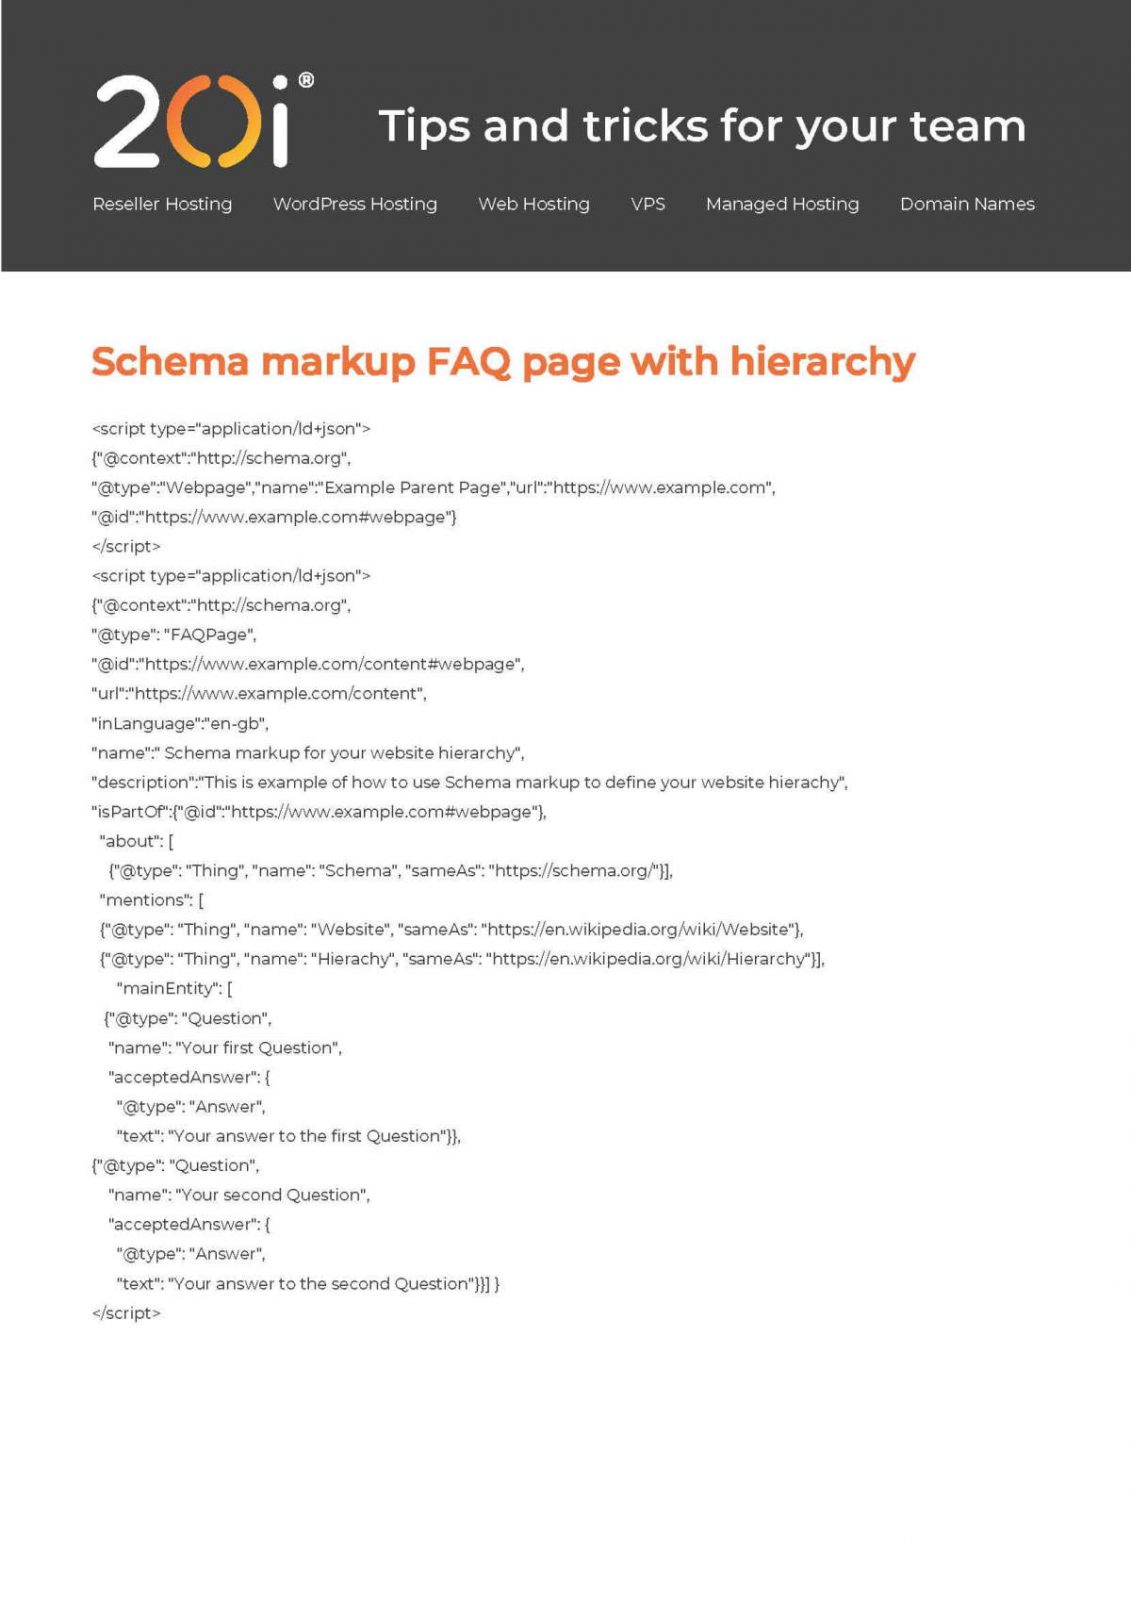 JSON-LD code for FAQ schema with entity and hierarchy markup